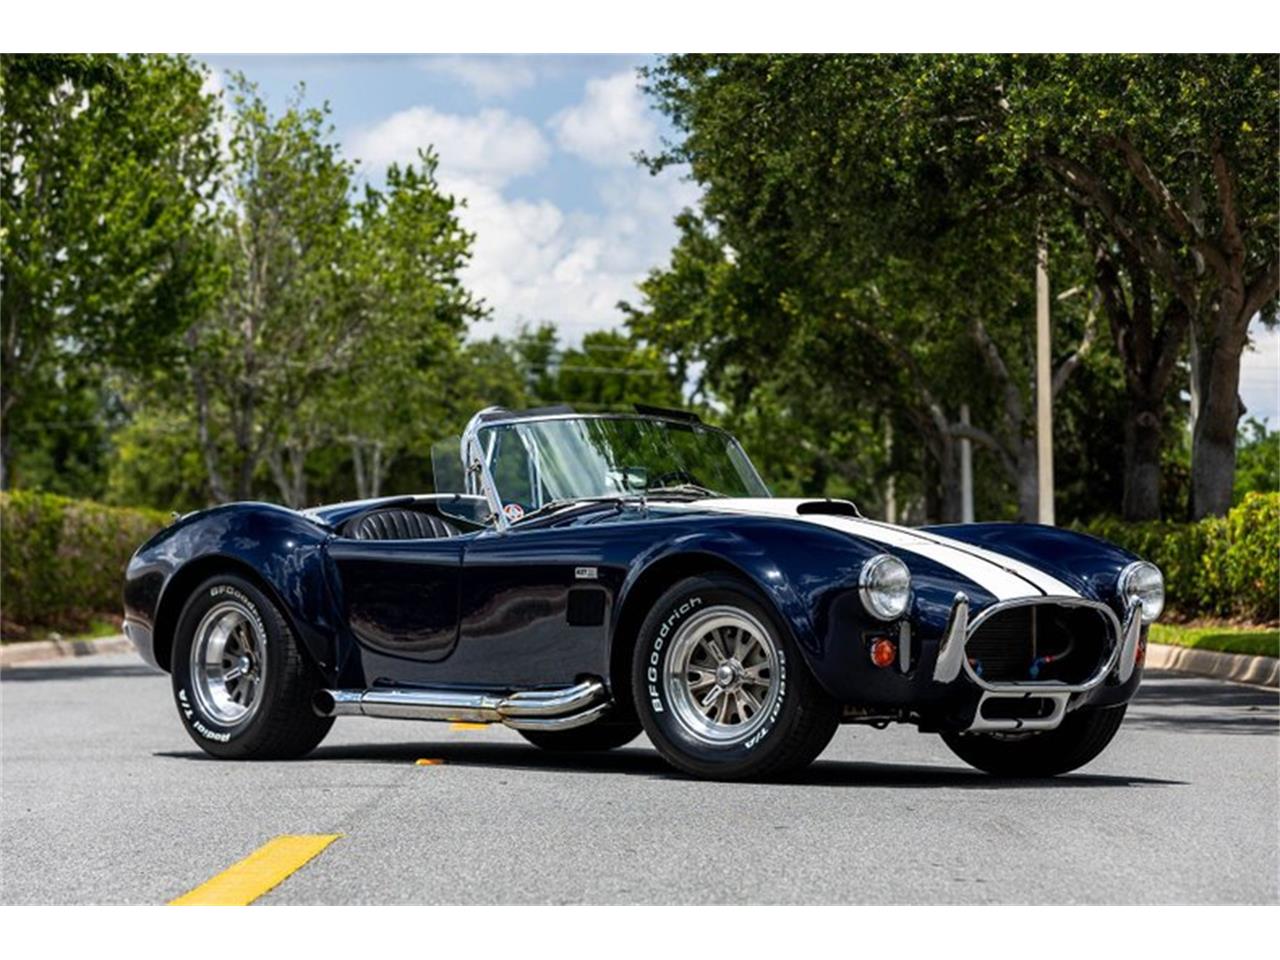 For Sale at Auction: 1966 Shelby Cobra in Punta Gorda, Florida for sale in Punta Gorda, FL